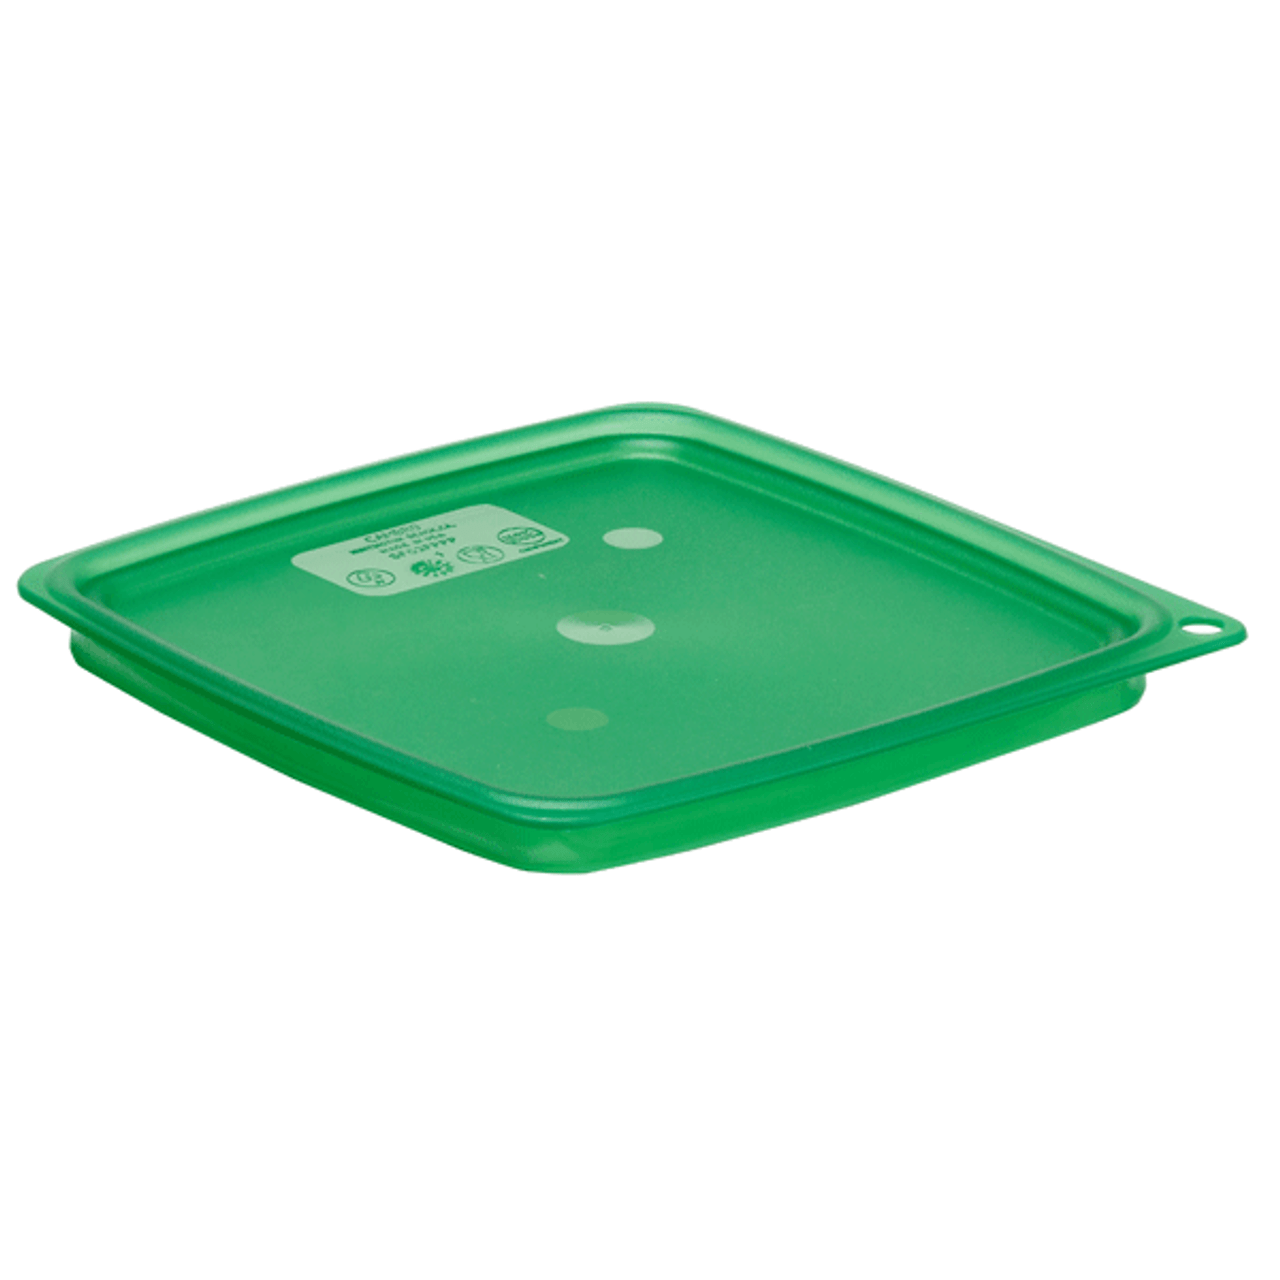 https://cdn11.bigcommerce.com/s-g3i86bef61/images/stencil/1280x1280/products/4510/4699/Cambro-SFC2FPPP265-FreshPro-Lid-Green__86517.1680729994.png?c=1